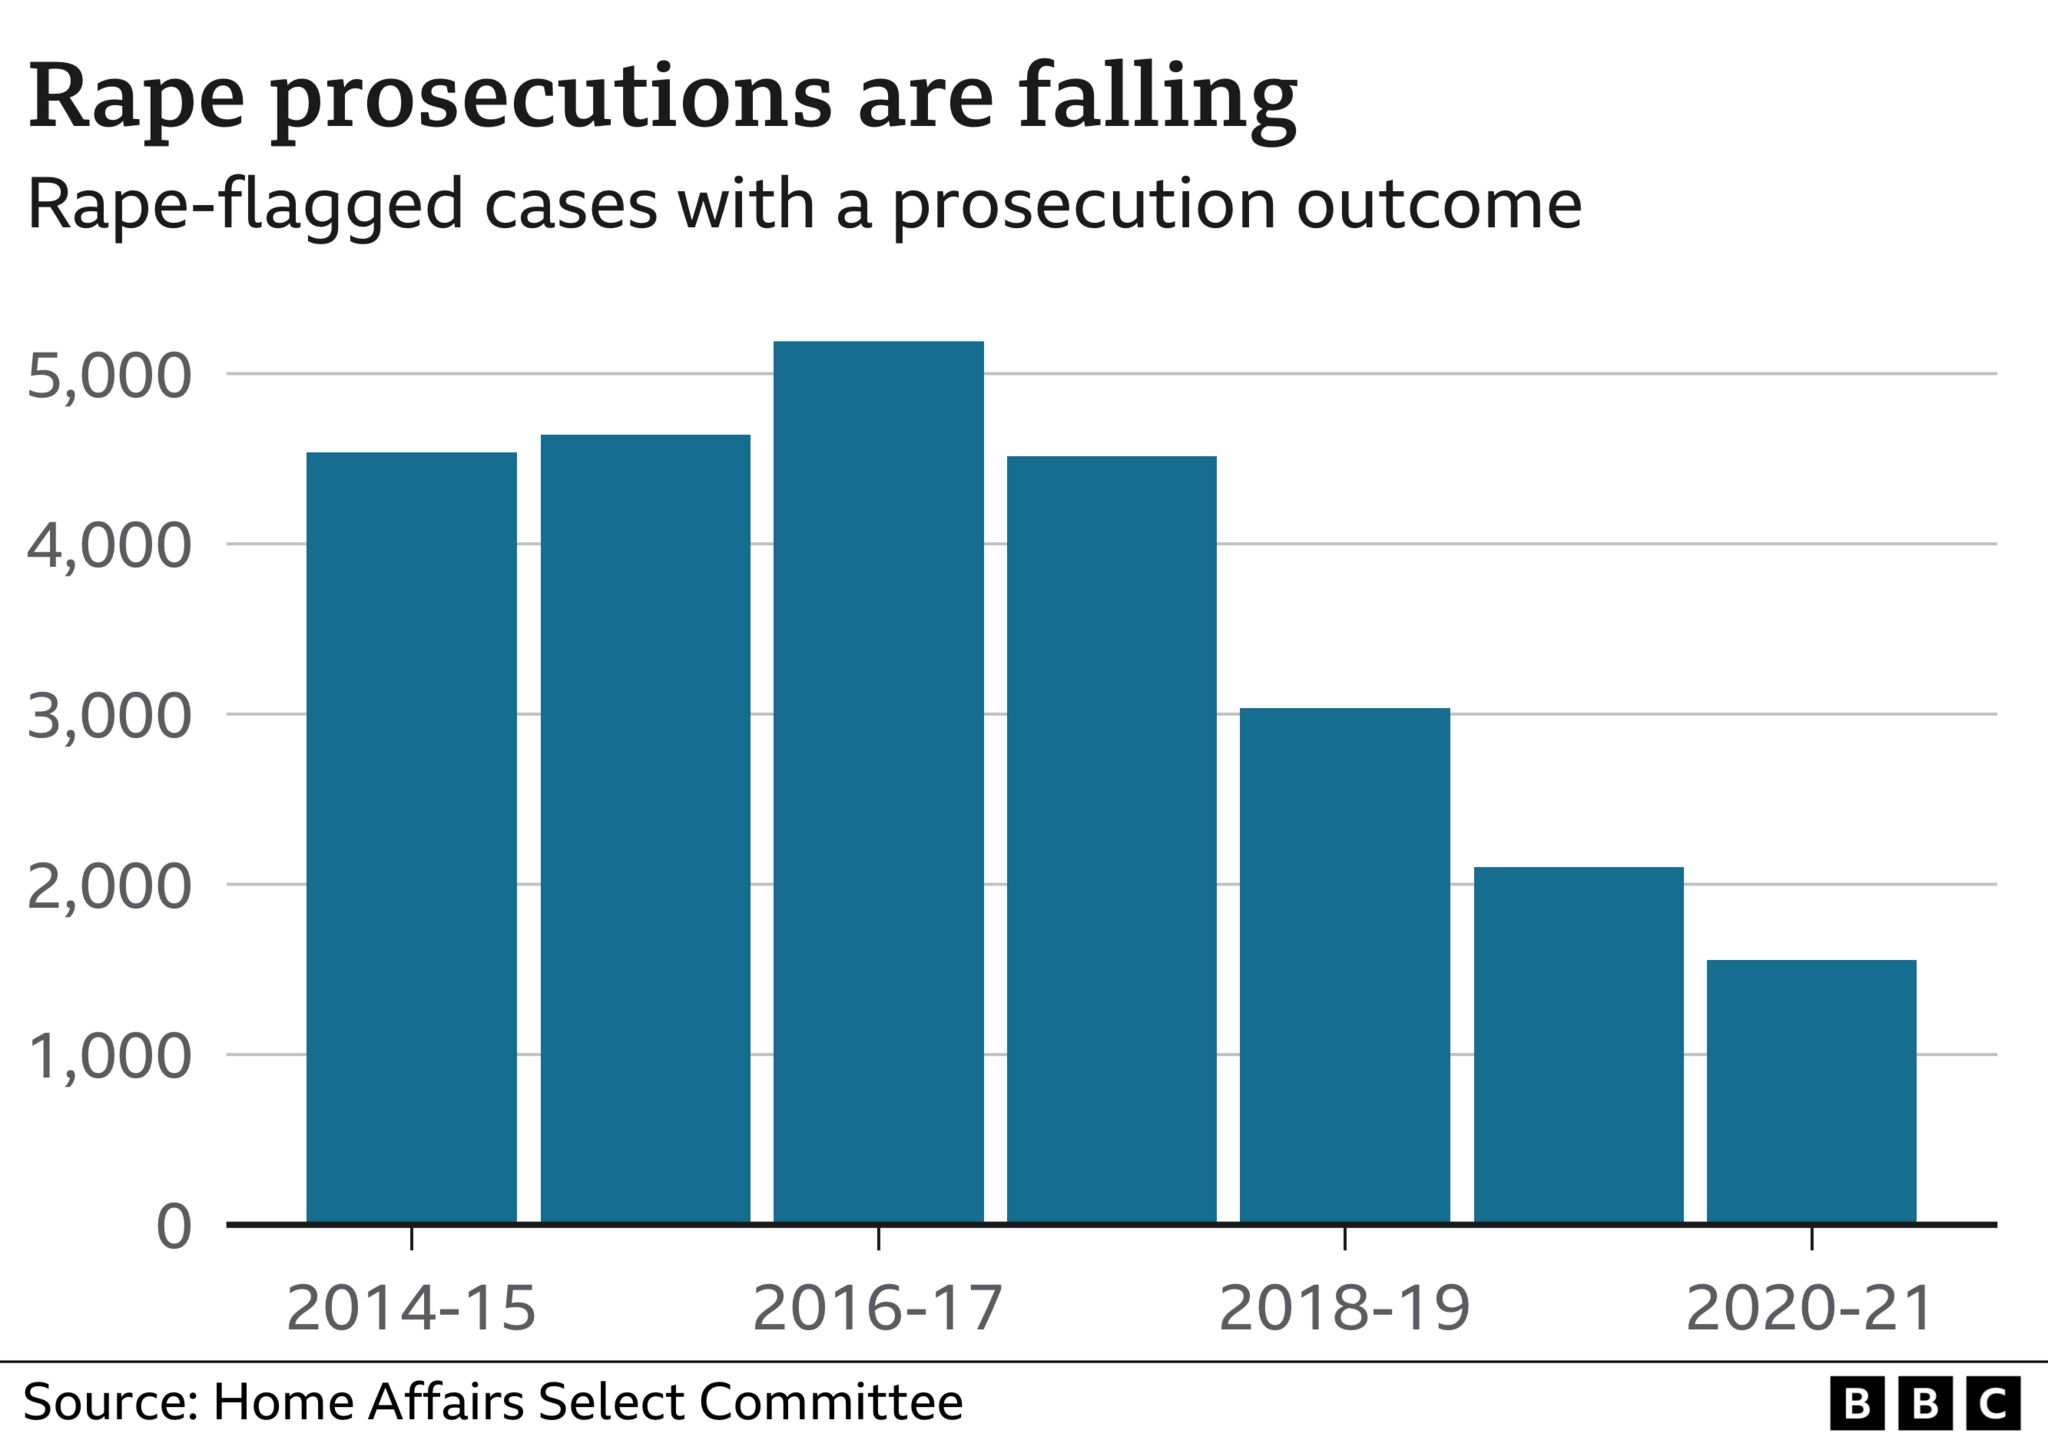 Graph showing a 70% decline over four years for rape prosecution in England and Wales